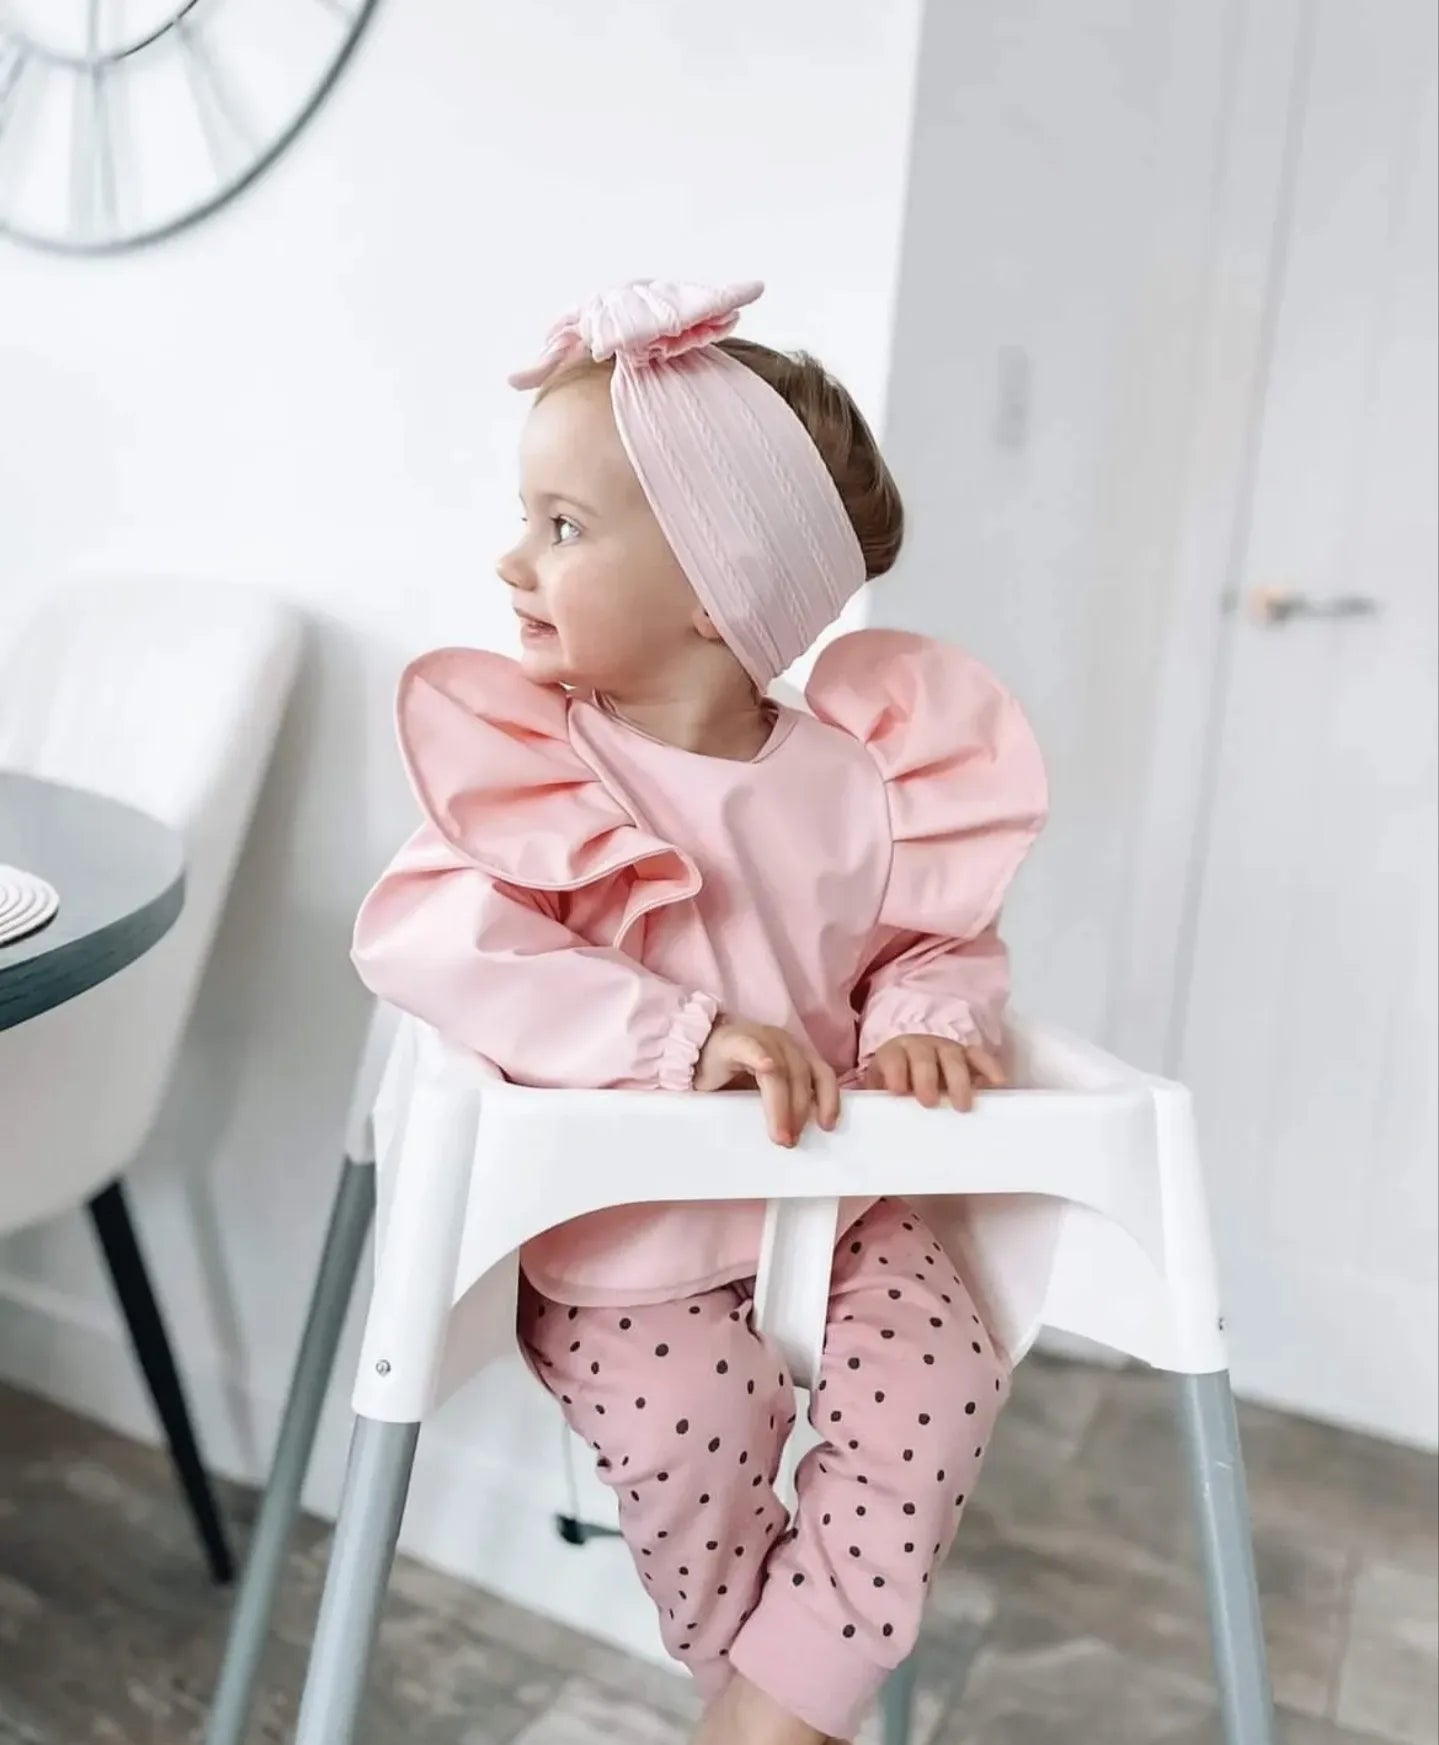 Pink Frill Detail Waterproof Bib with Sleeves - Betty Brown Boutique Ltd